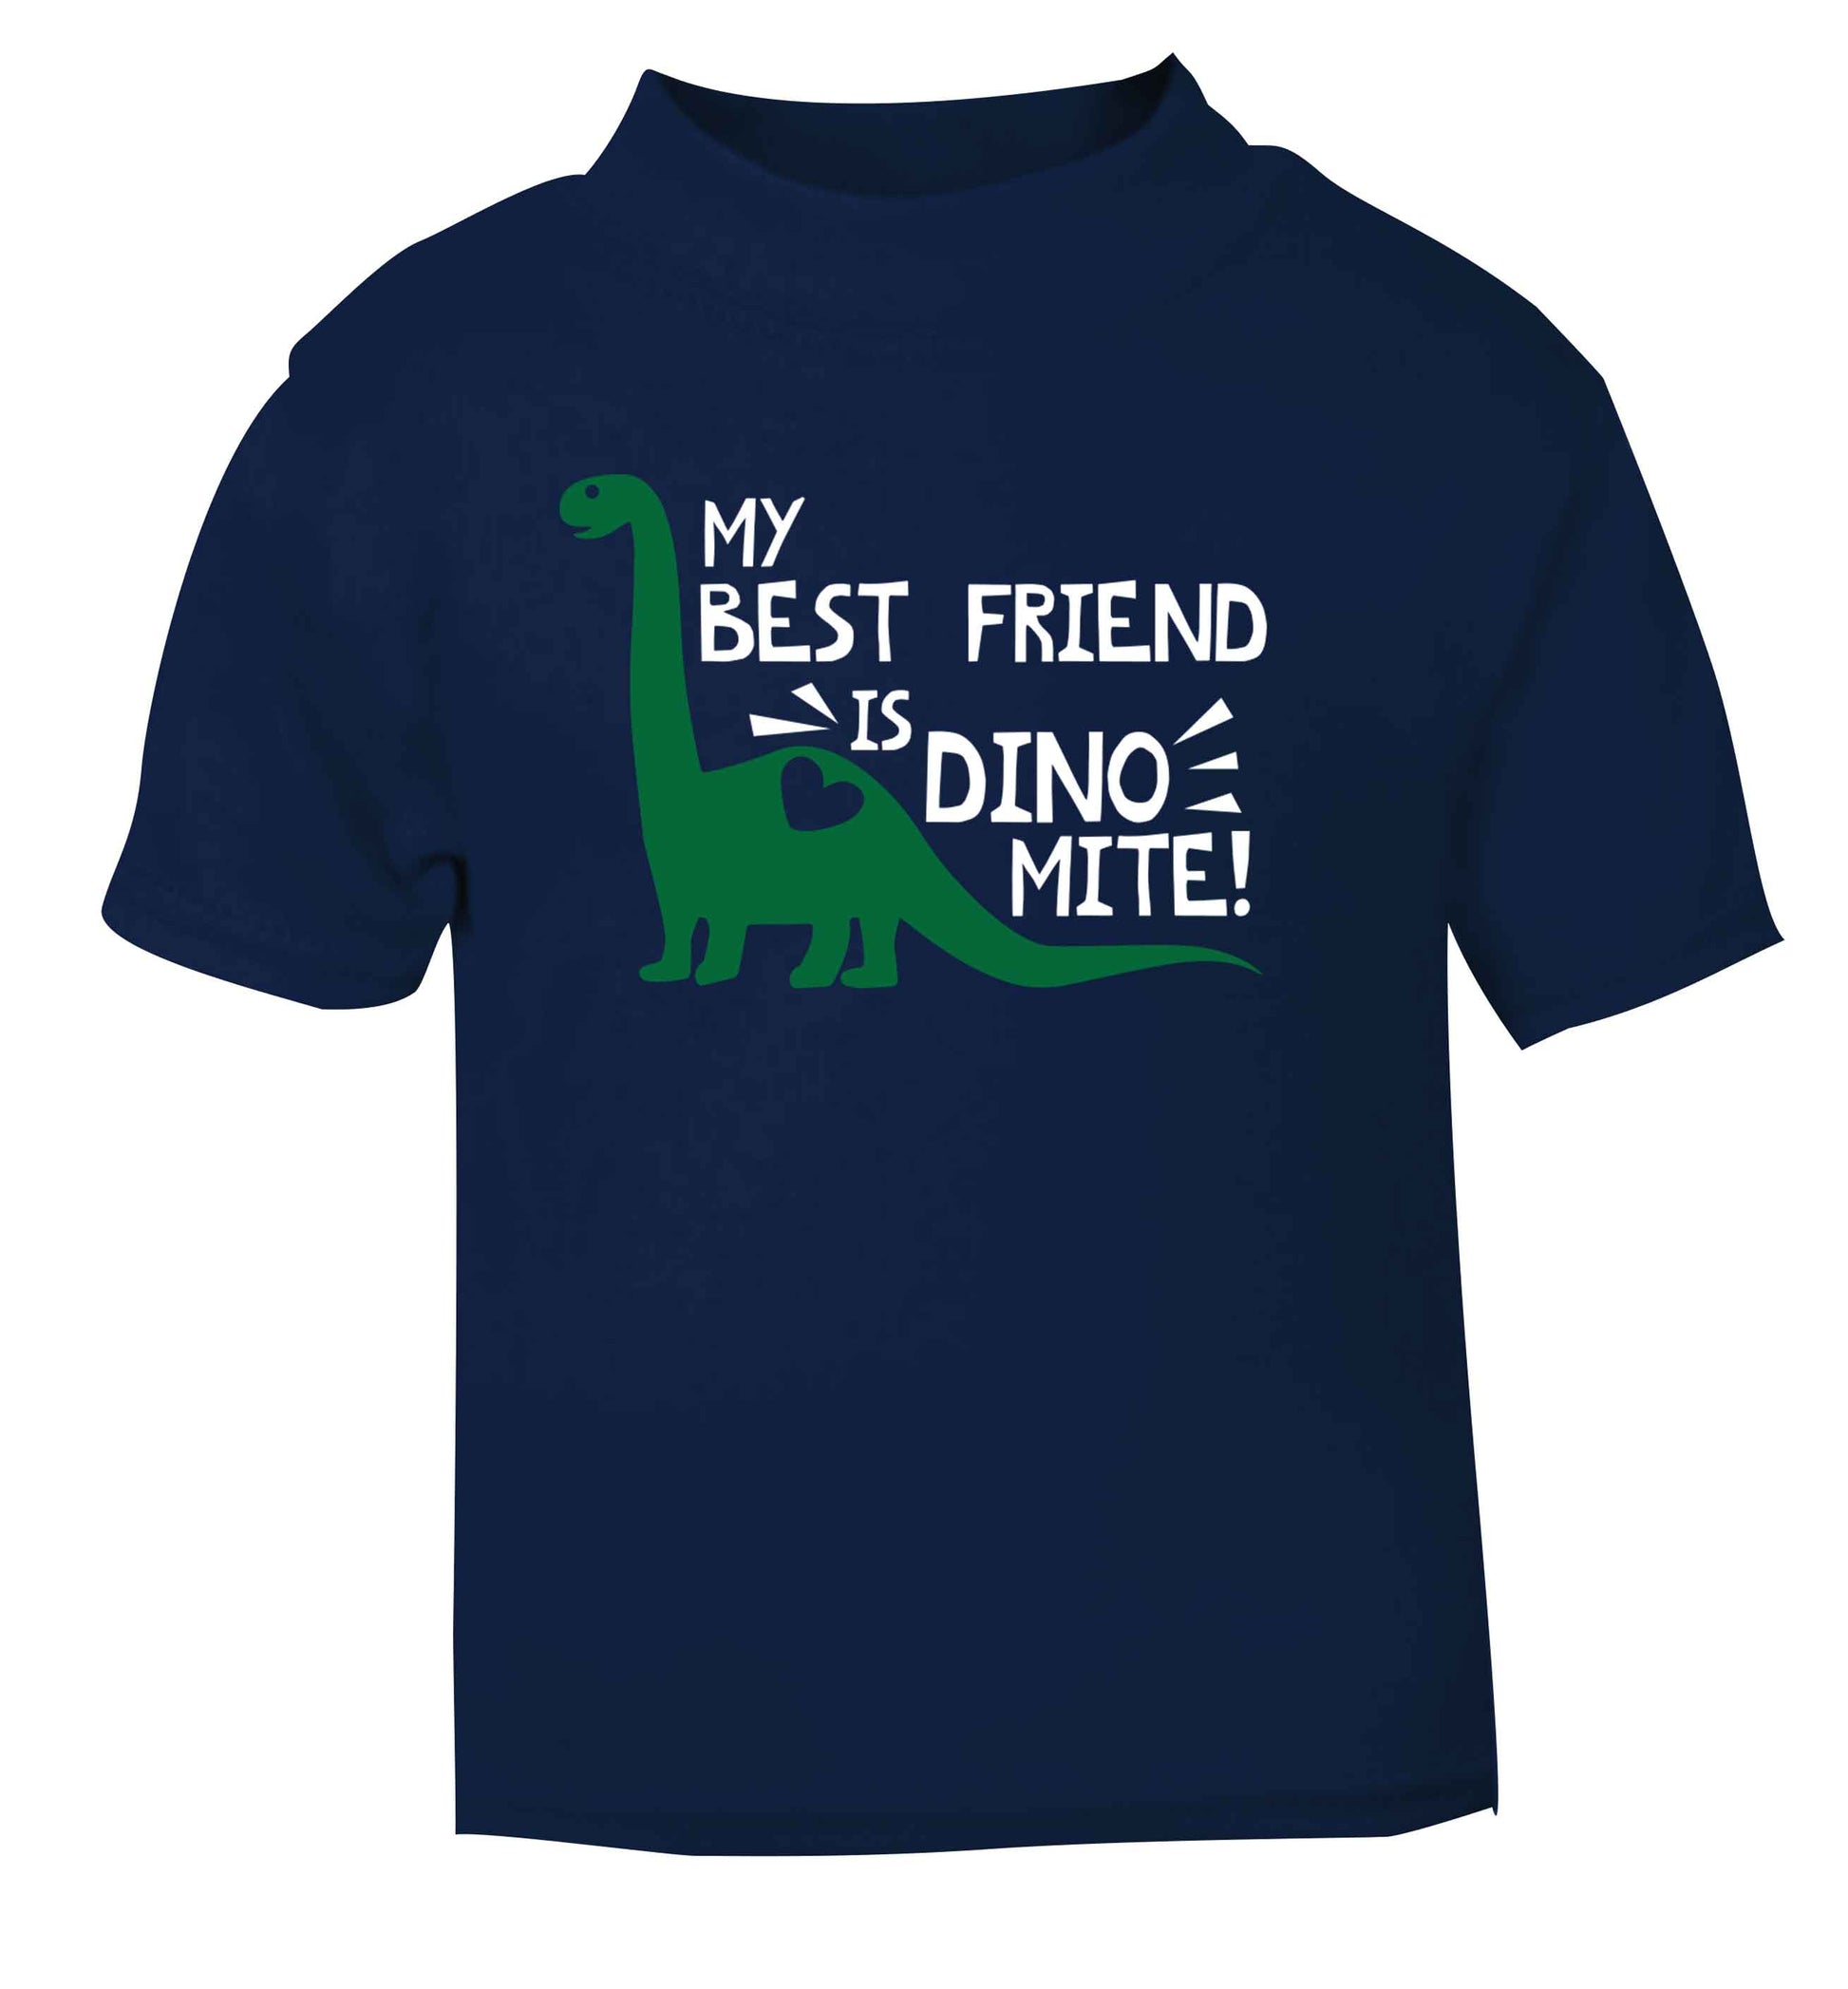 My cousin is dinomite! navy Baby Toddler Tshirt 2 Years